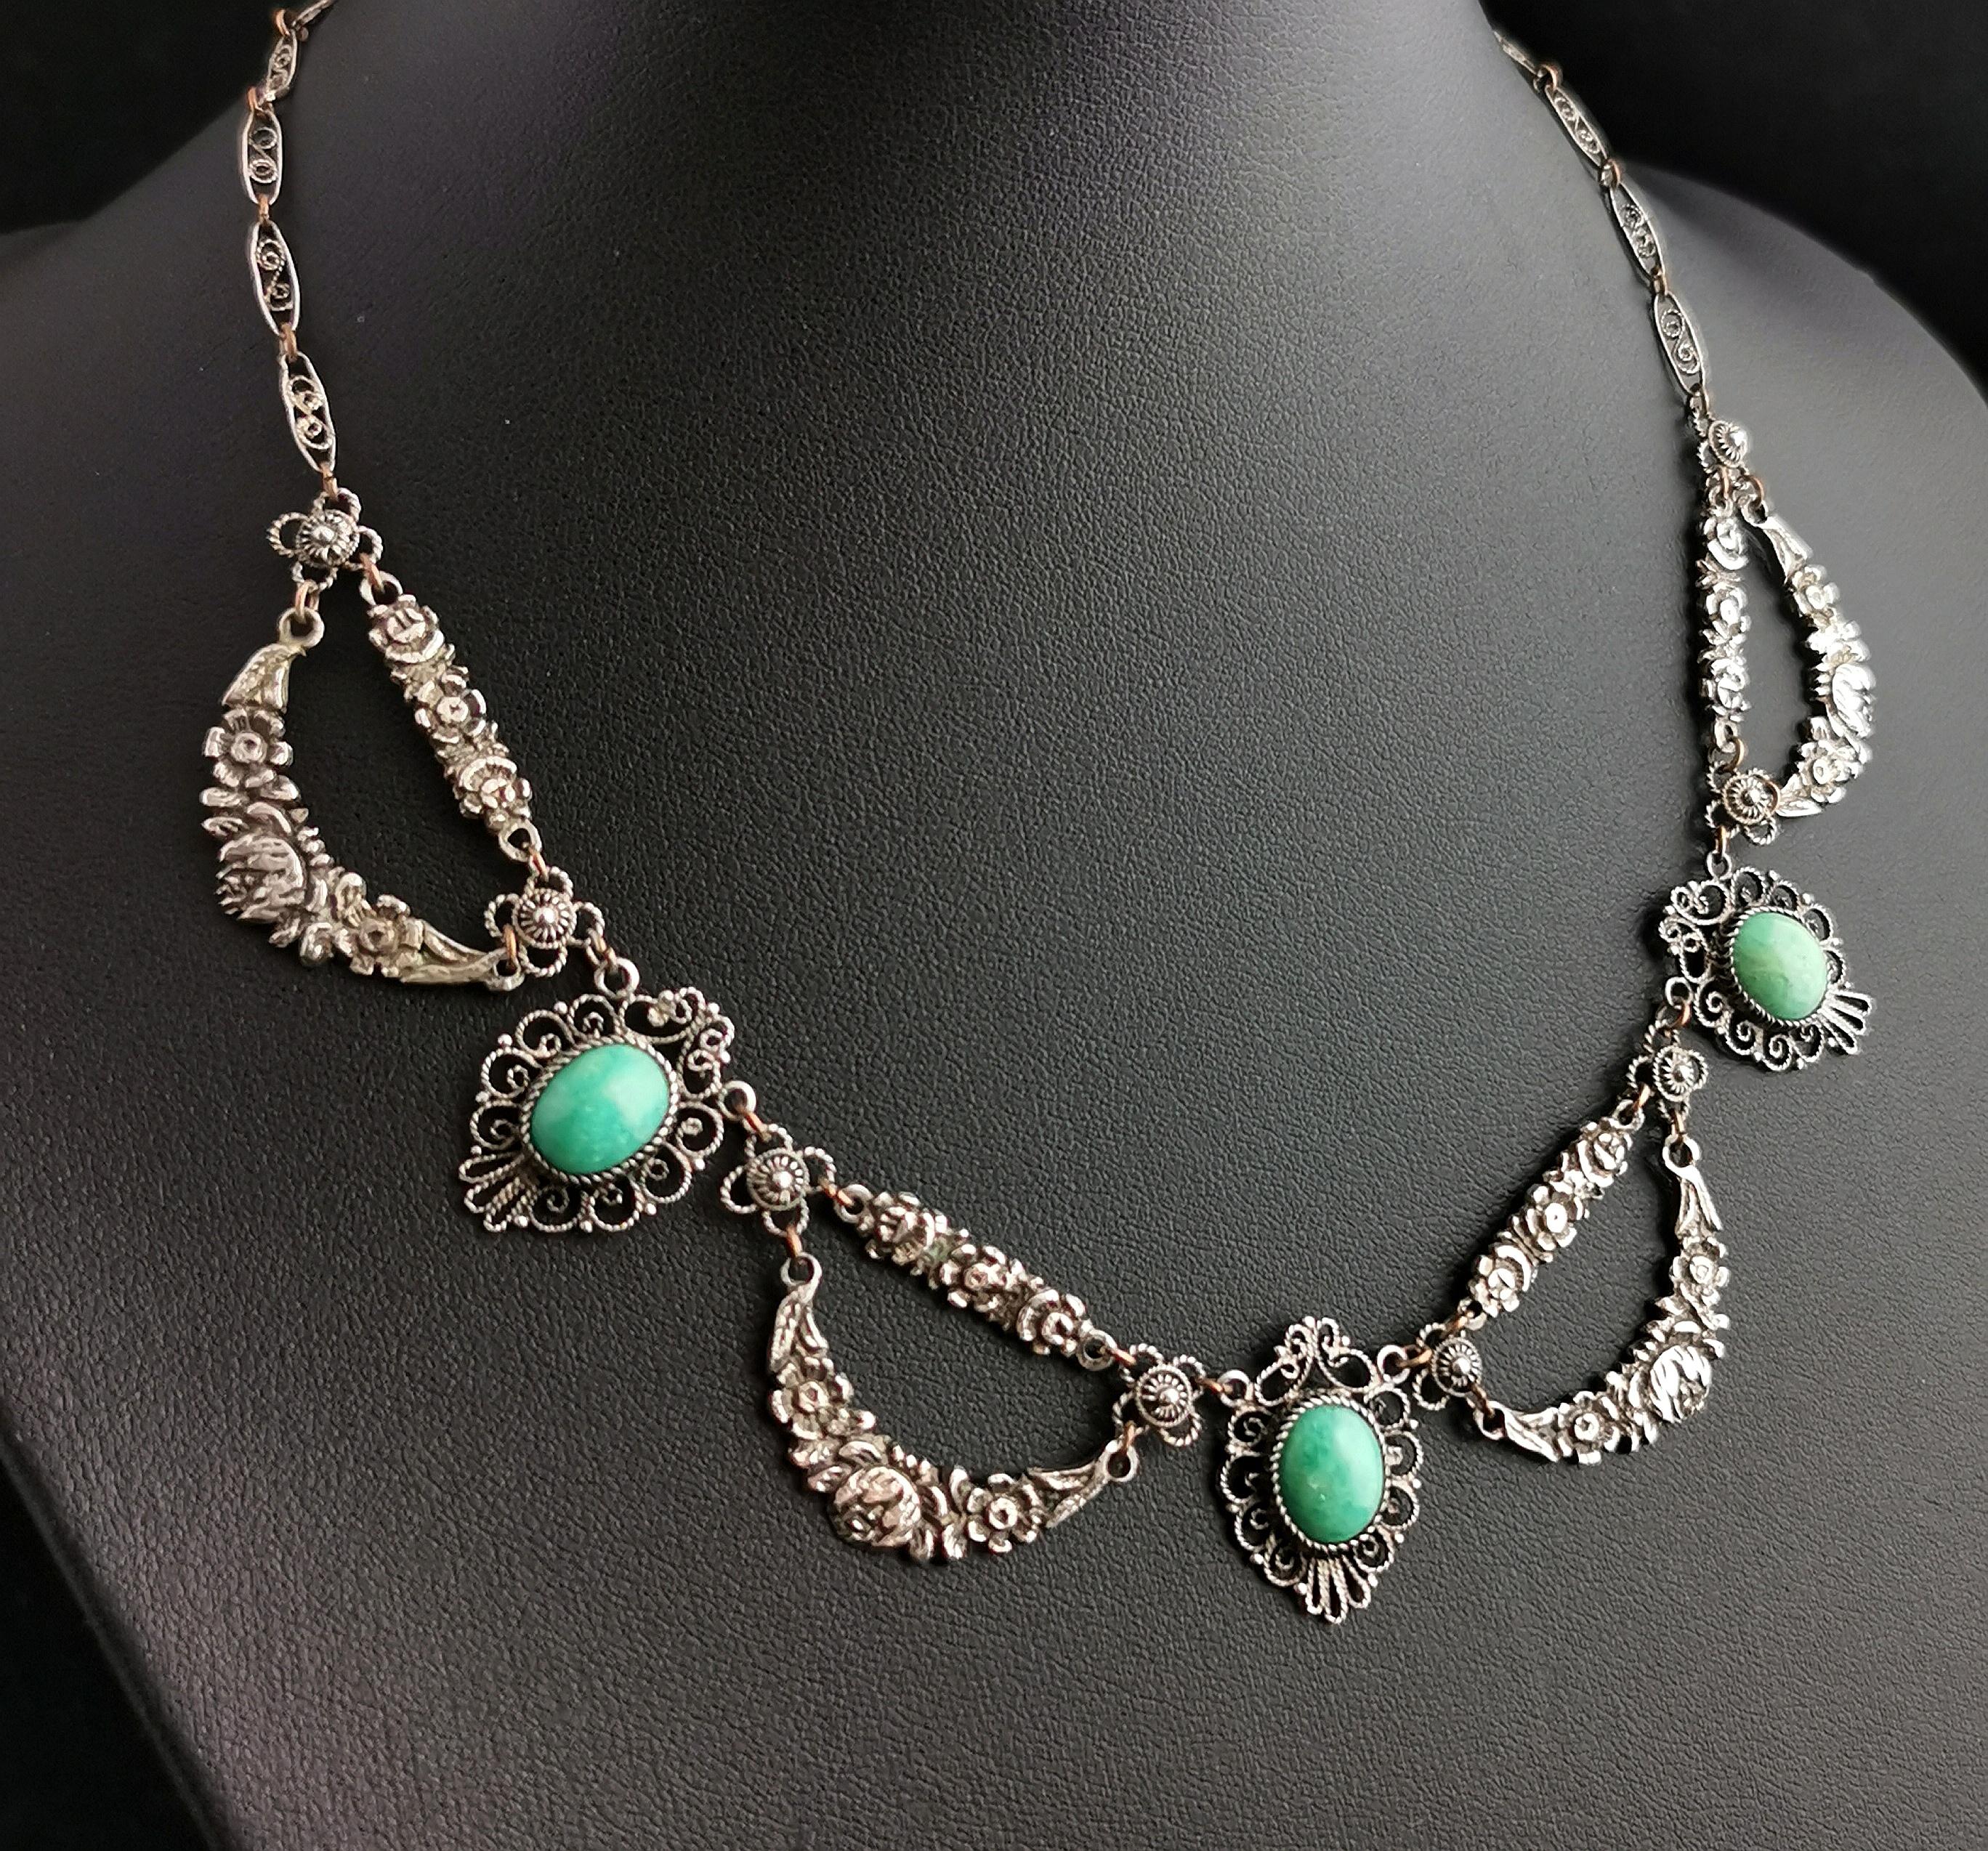 A beautiful vintage Art Deco silver and Amazonite festoon style necklace.

This pretty necklace is designed with delicate silver filigree links, intercepted with repousse floral panels.

It has three carved and polished Amazonite cabochons set into